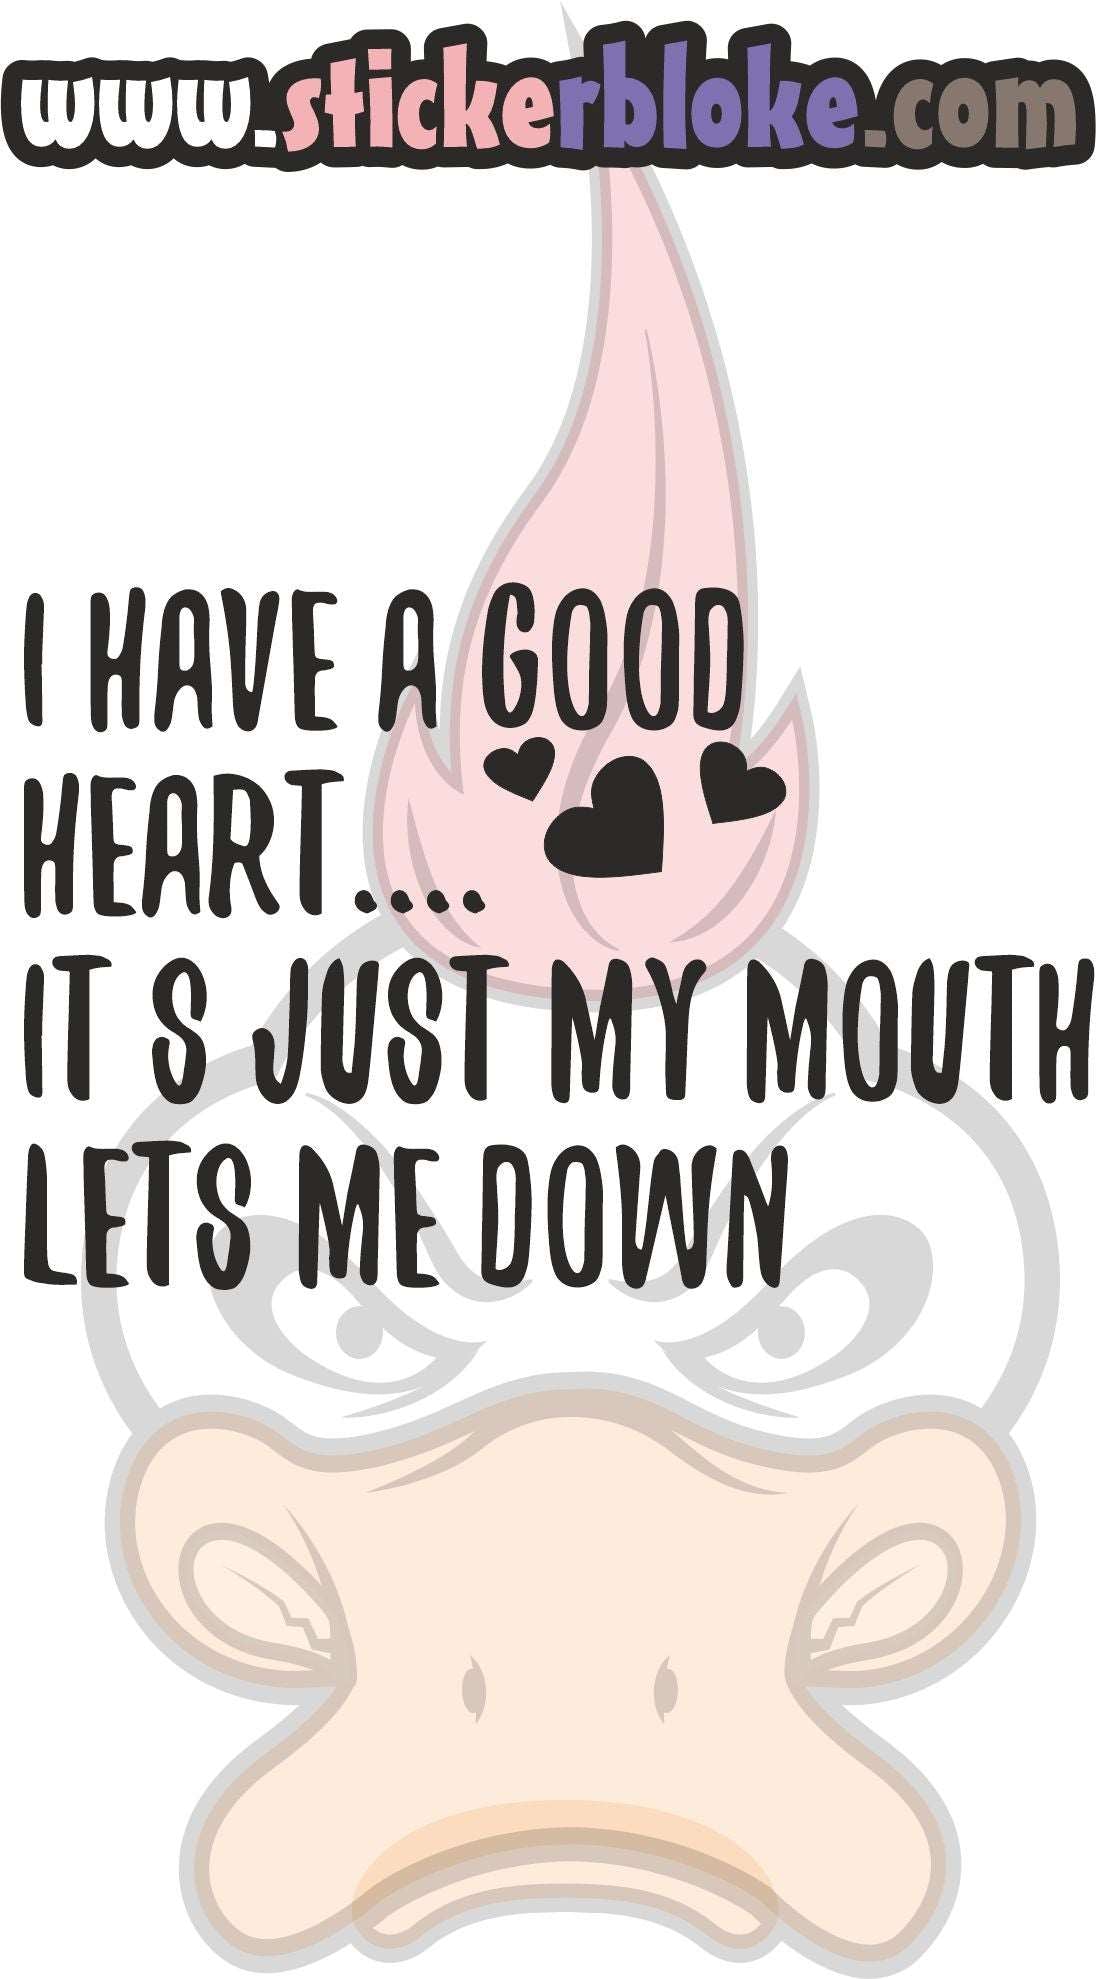 I HAVE A GOOD HEART ITS JUST MY MOUTH LETS ME DOWN